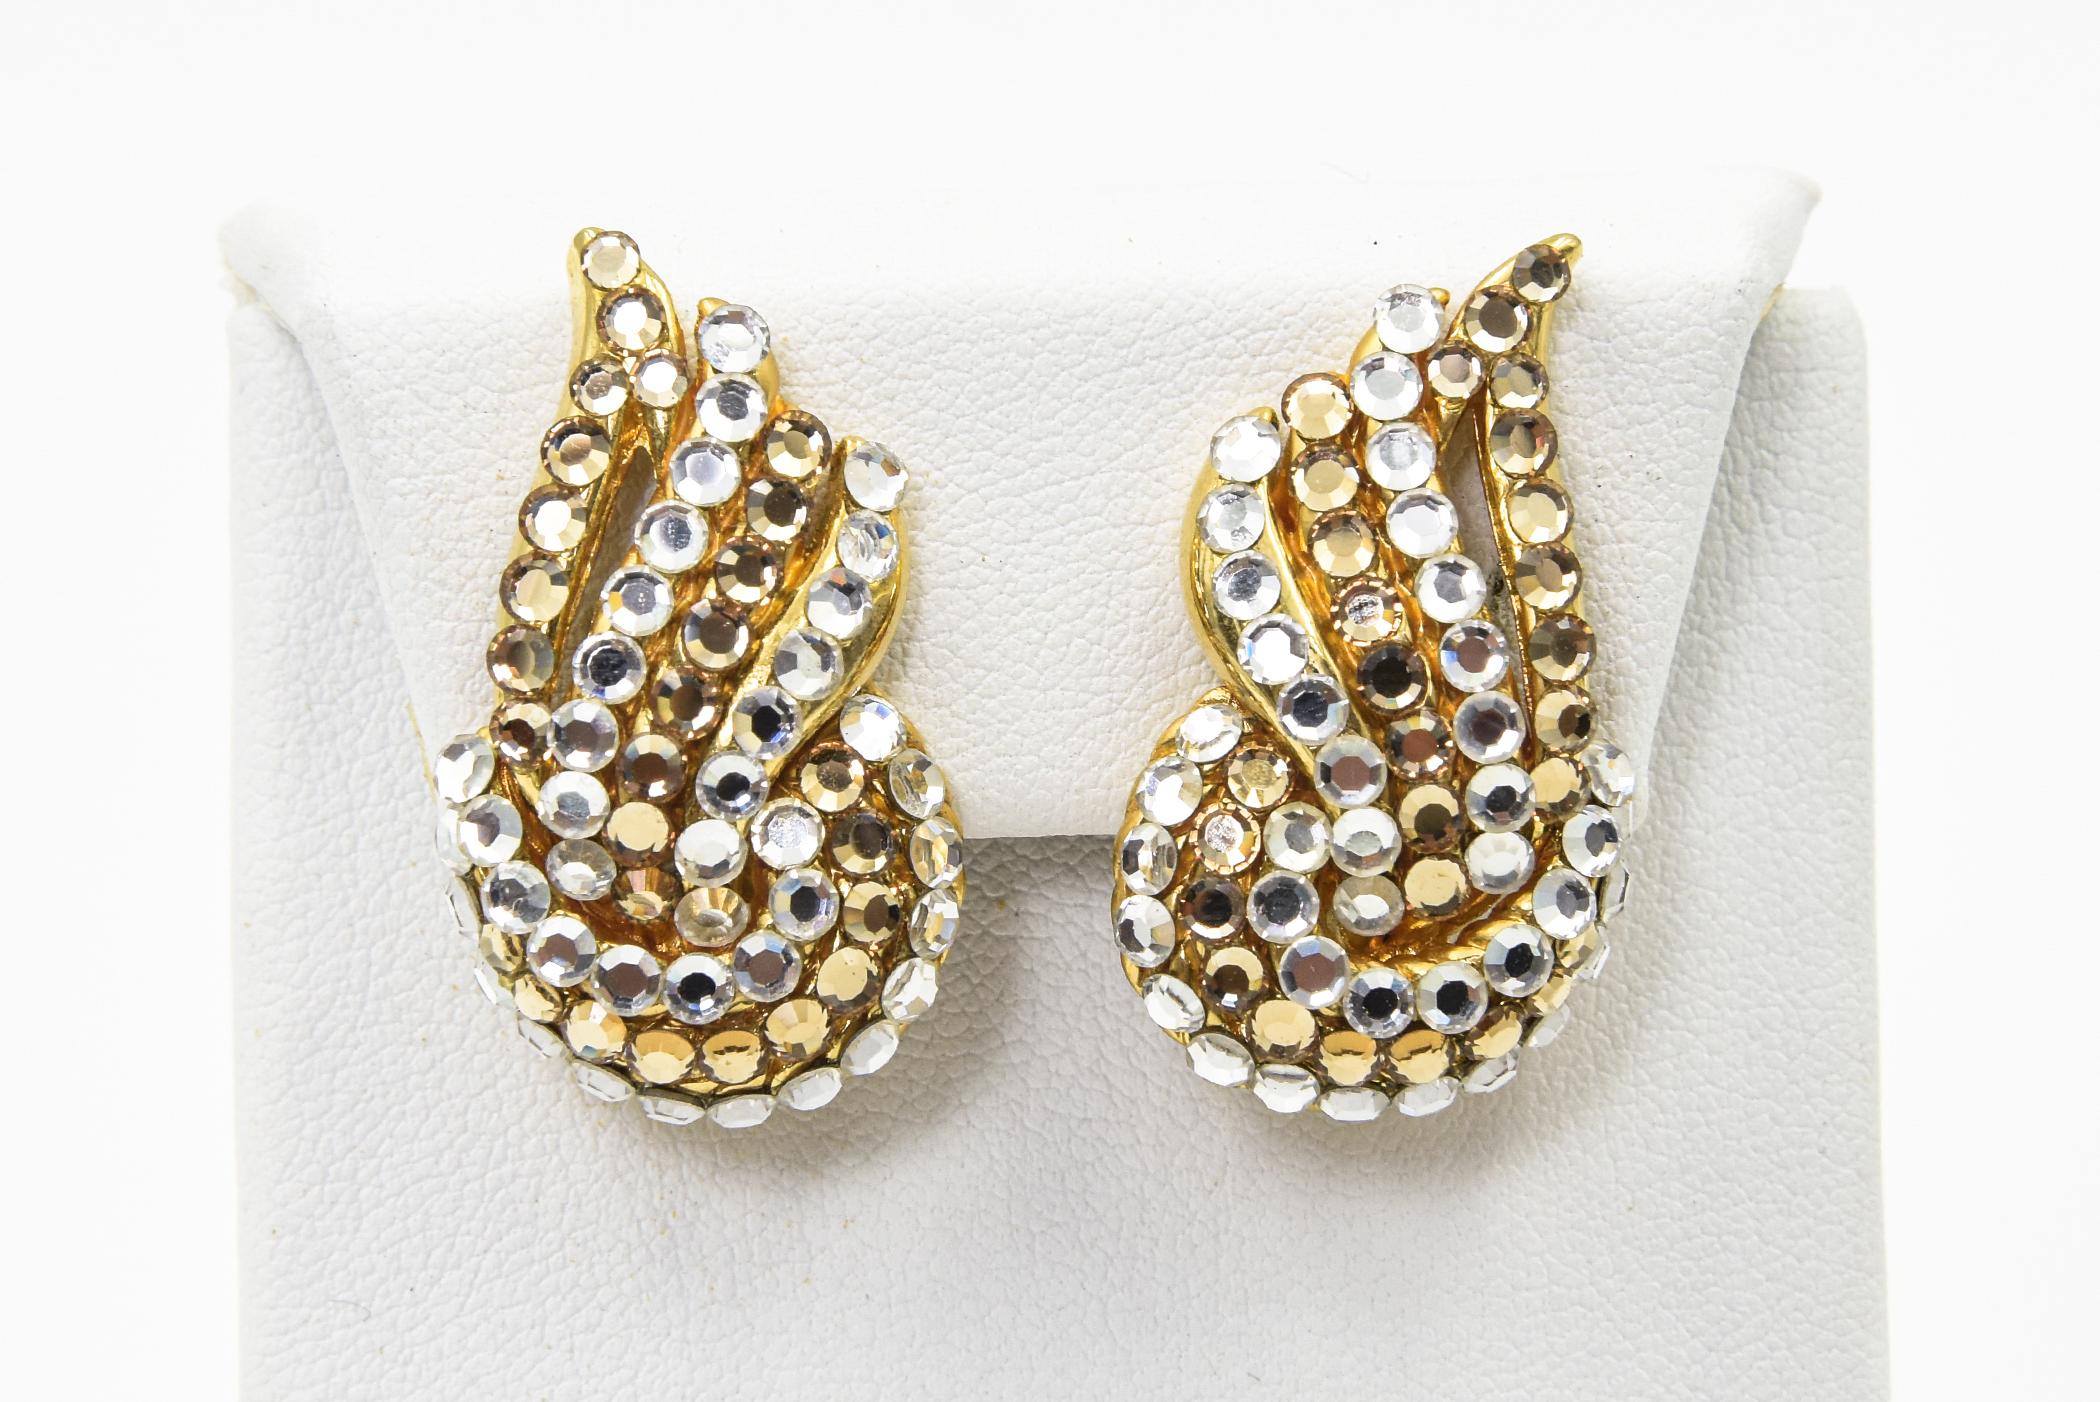 Stunning earrings featuring clear and gold tone crystals that produce a swirl ribbon design on the ear.  Mounted in a gold toned metal, these earrings have a clip-on back.